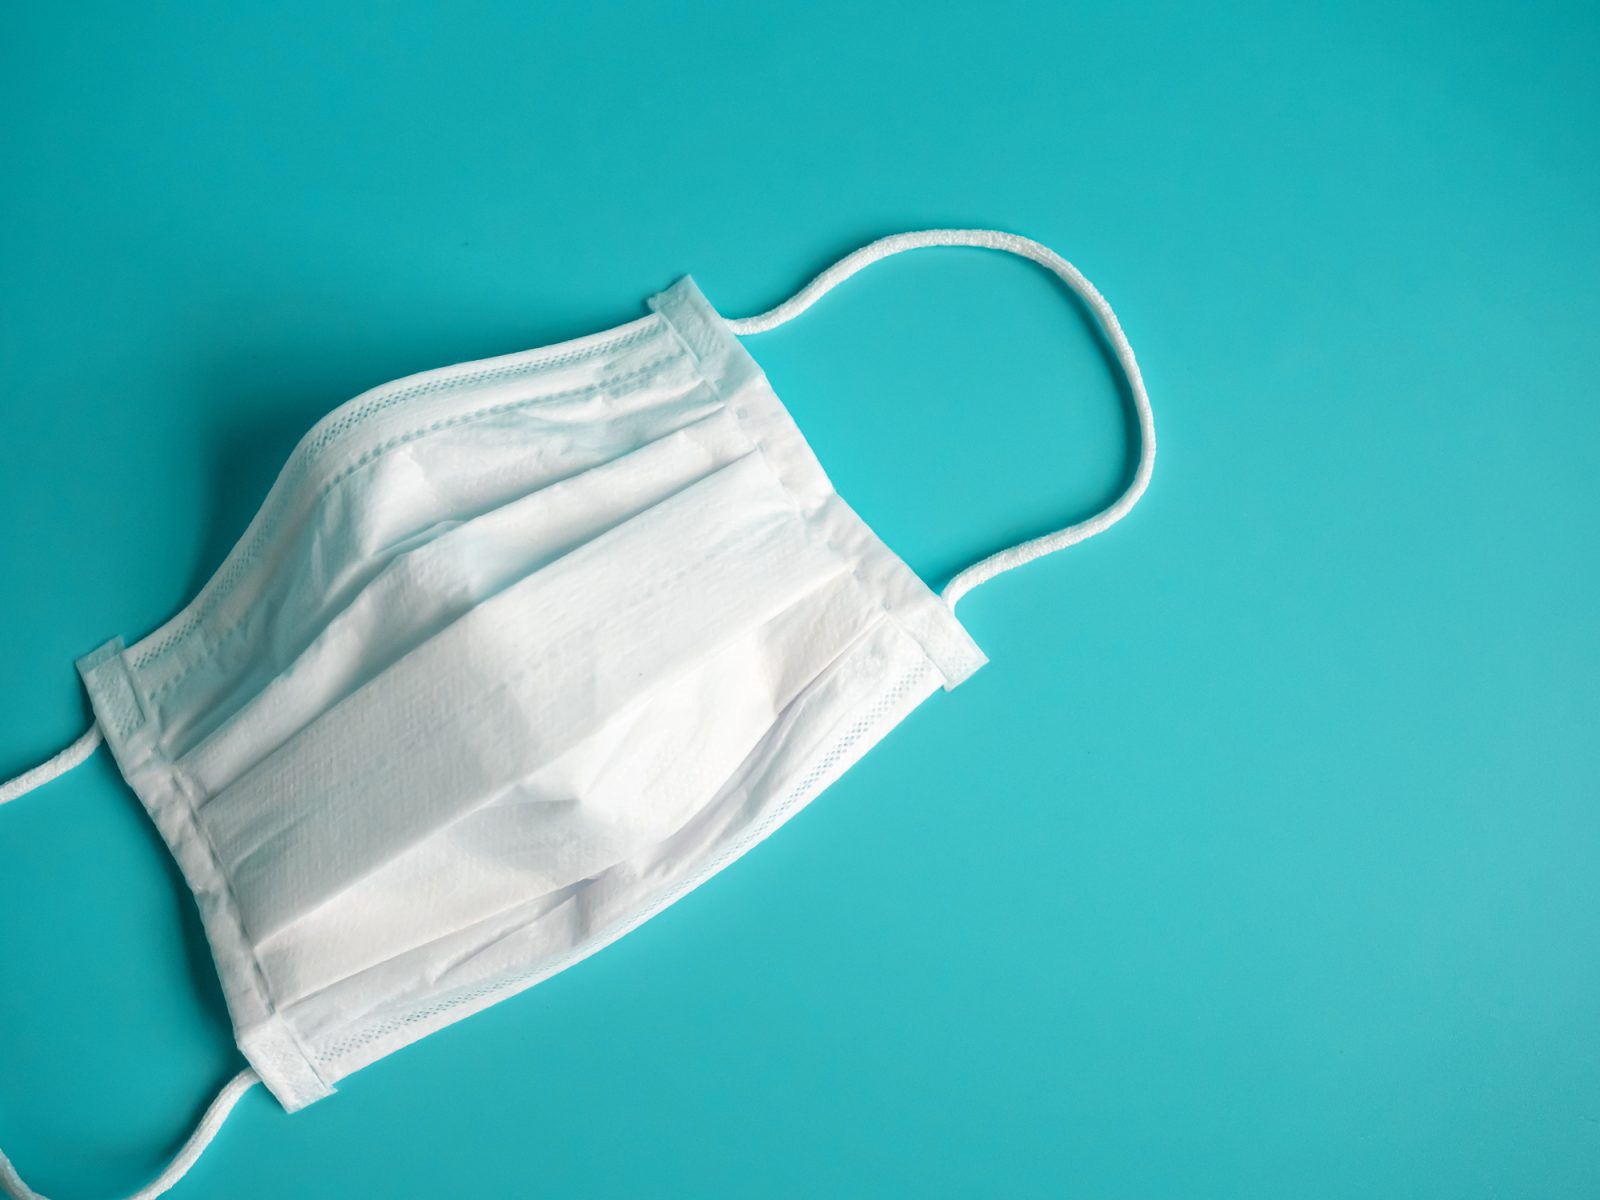 White surgical mask on a blue background.